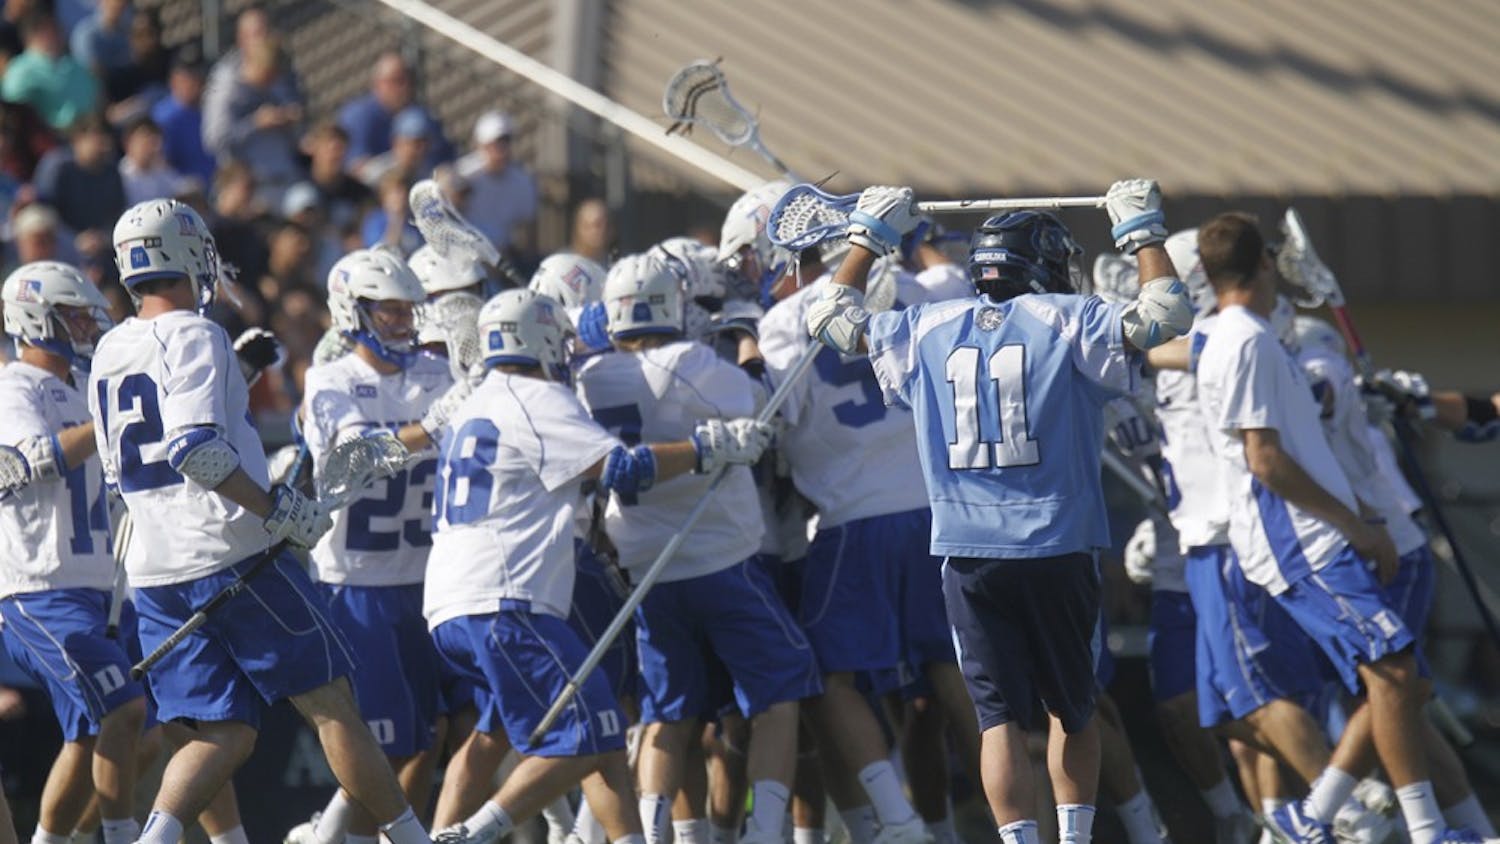 	Joey Sankey (11) puts his hands up as the Duke lacrosse team celebrates after Duke’s Jordan Wolf scored in overtime to win the game 9-8. 